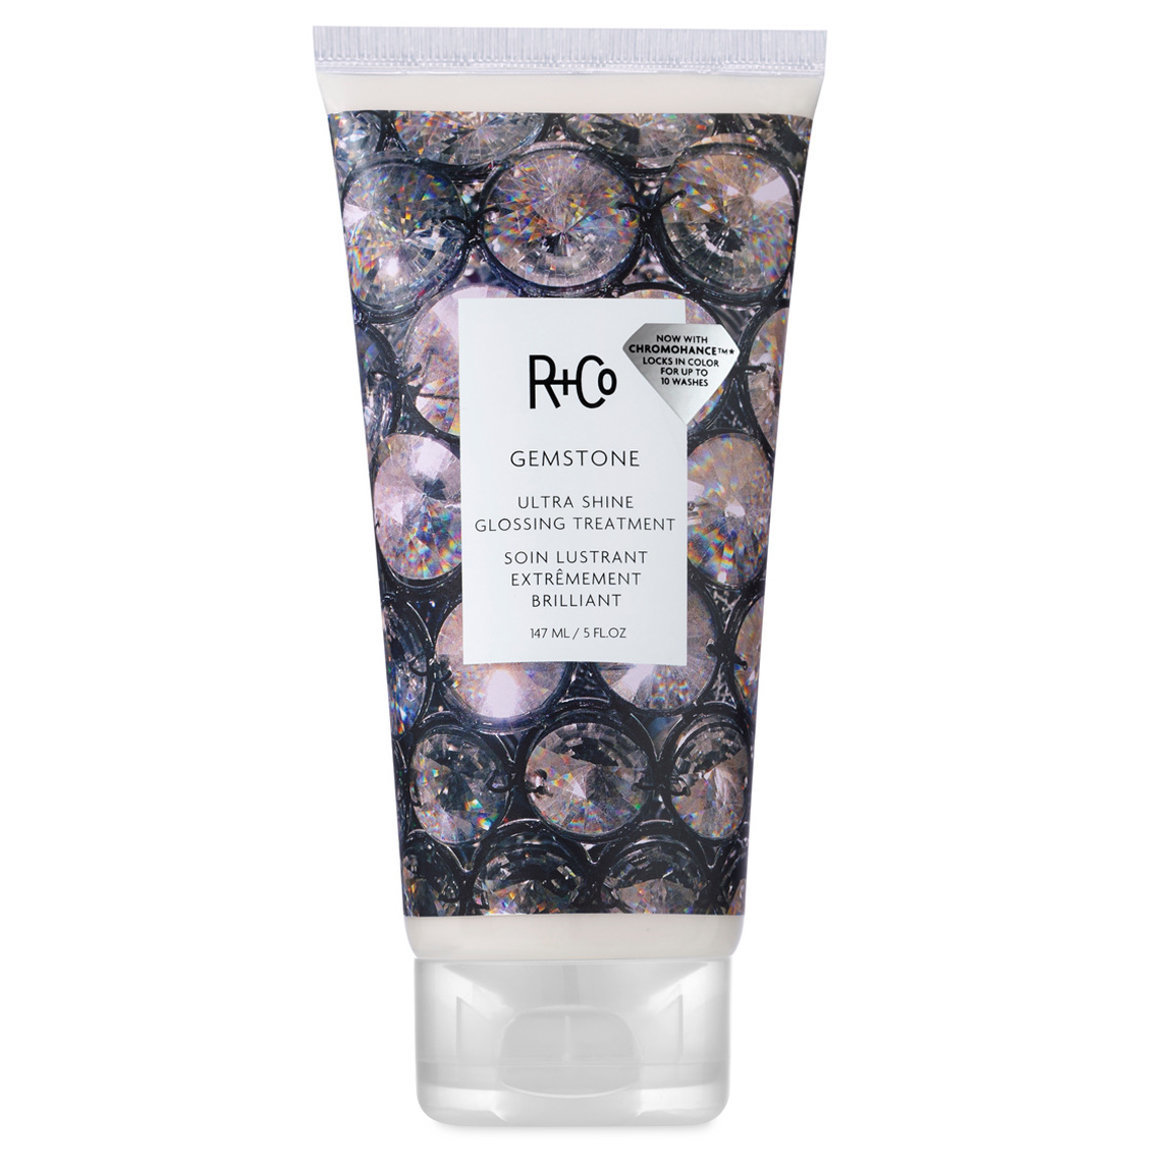 R+Co Gemstone Ultra Shine Glossing Treatment alternative view 1 - product swatch.